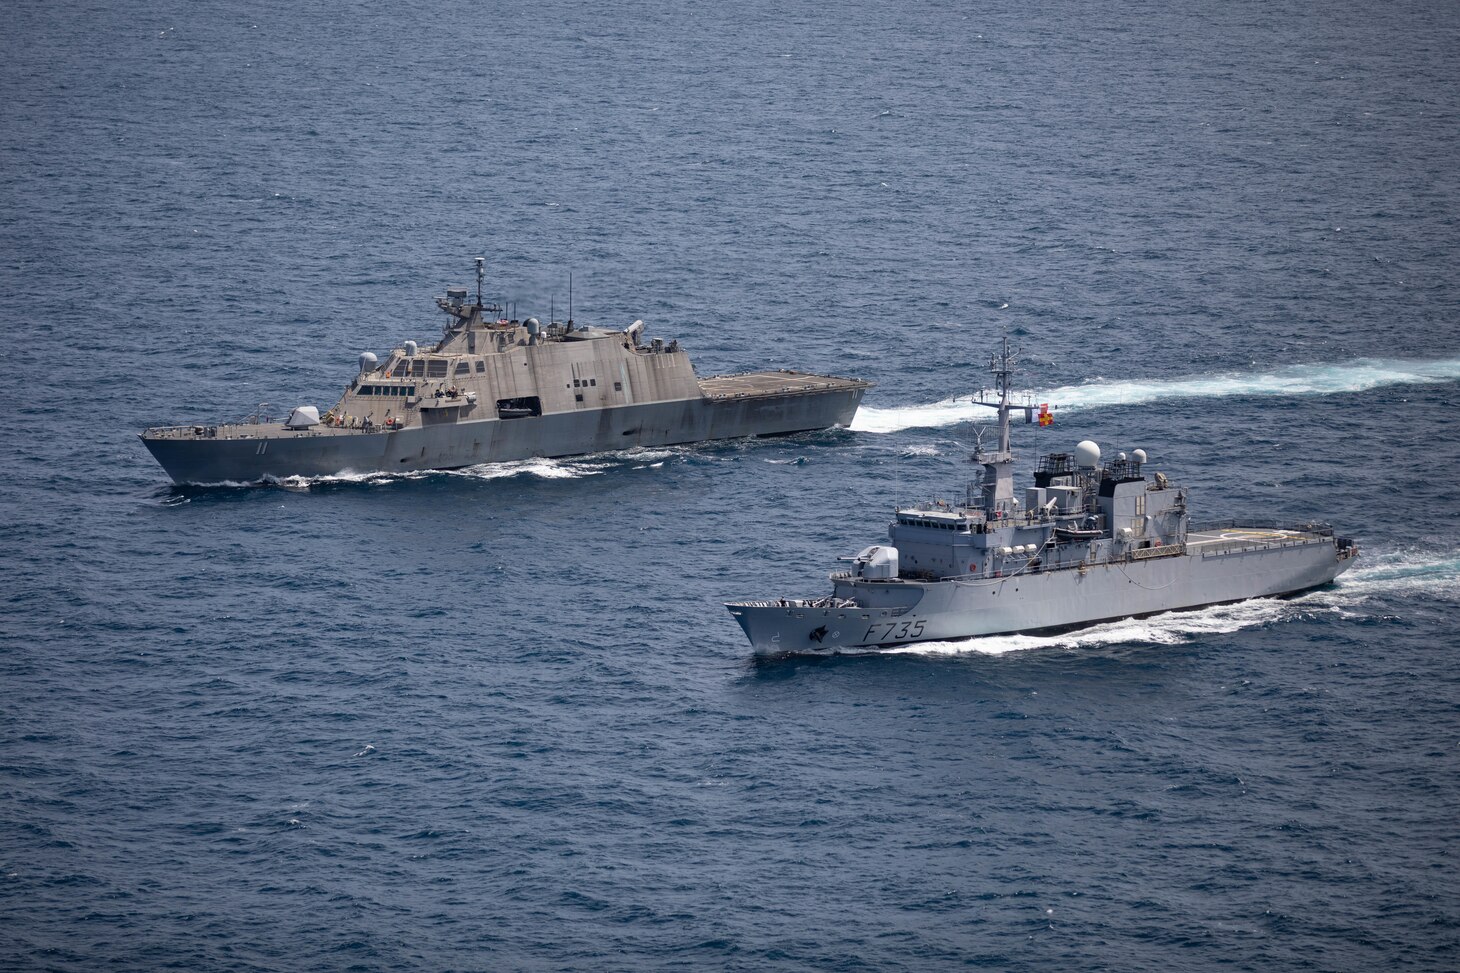 The Freedom-variant littoral combat ship USS Sioux City (LCS 11) conducts a bilateral maritime exercise with the French Navy Floréal-class frigate FS Germinal (F735)